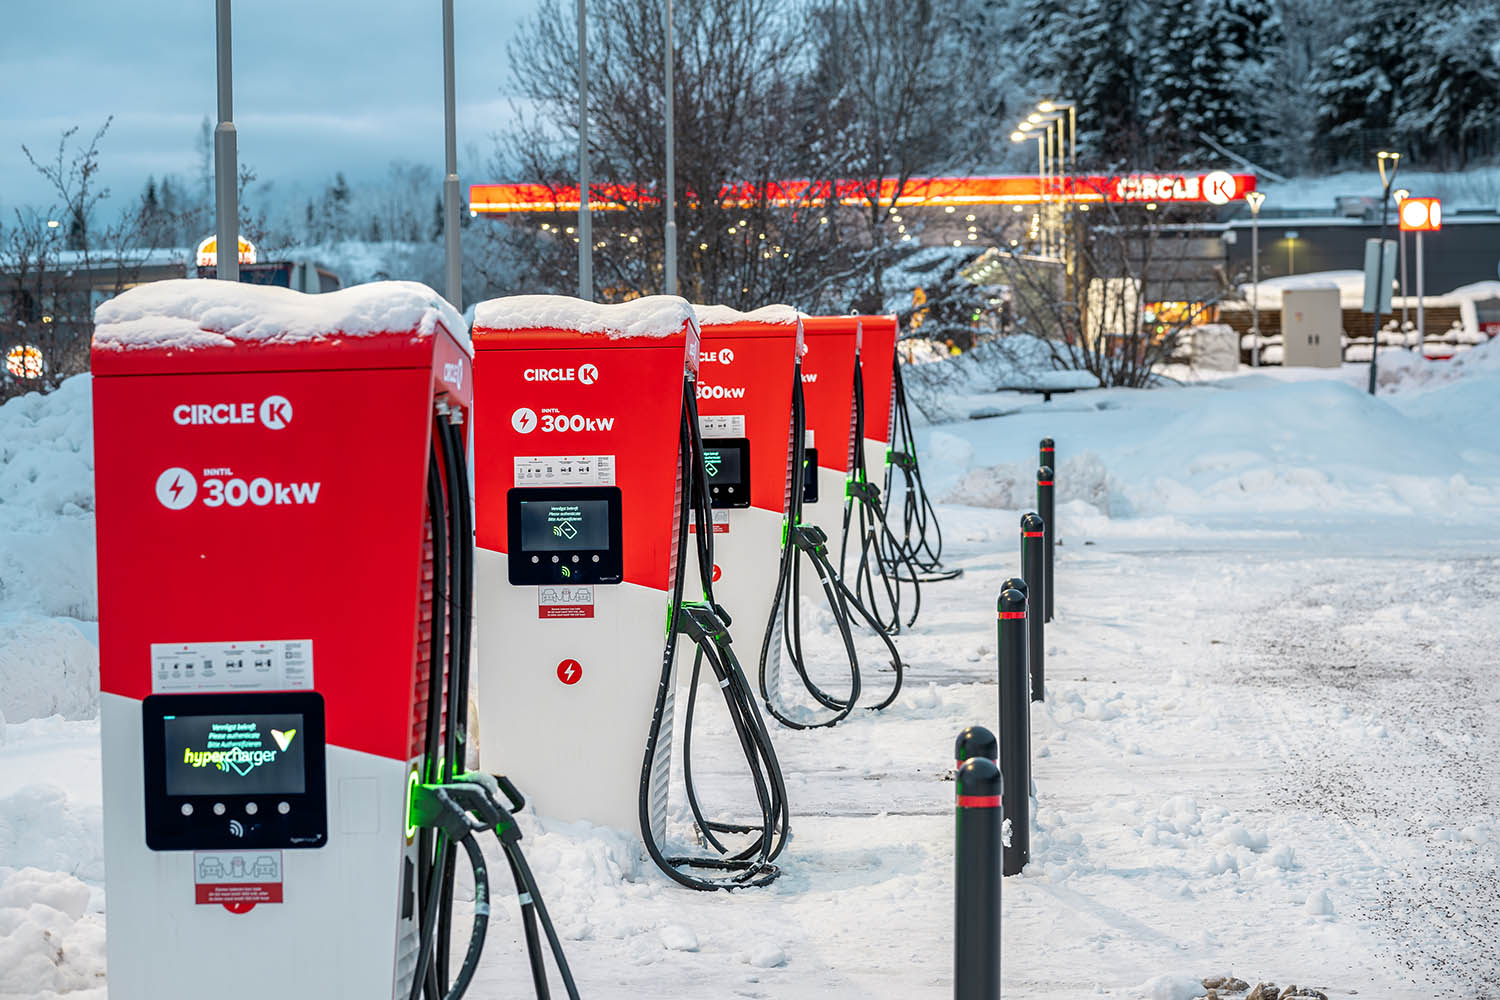 Nuvve's cloud-based software will allow fast chargers to provide a variety of grid services including frequency regulation, generating revenue for Circle K and Nuvve by stabilising deviations in the Norwegian and Danish electric grid